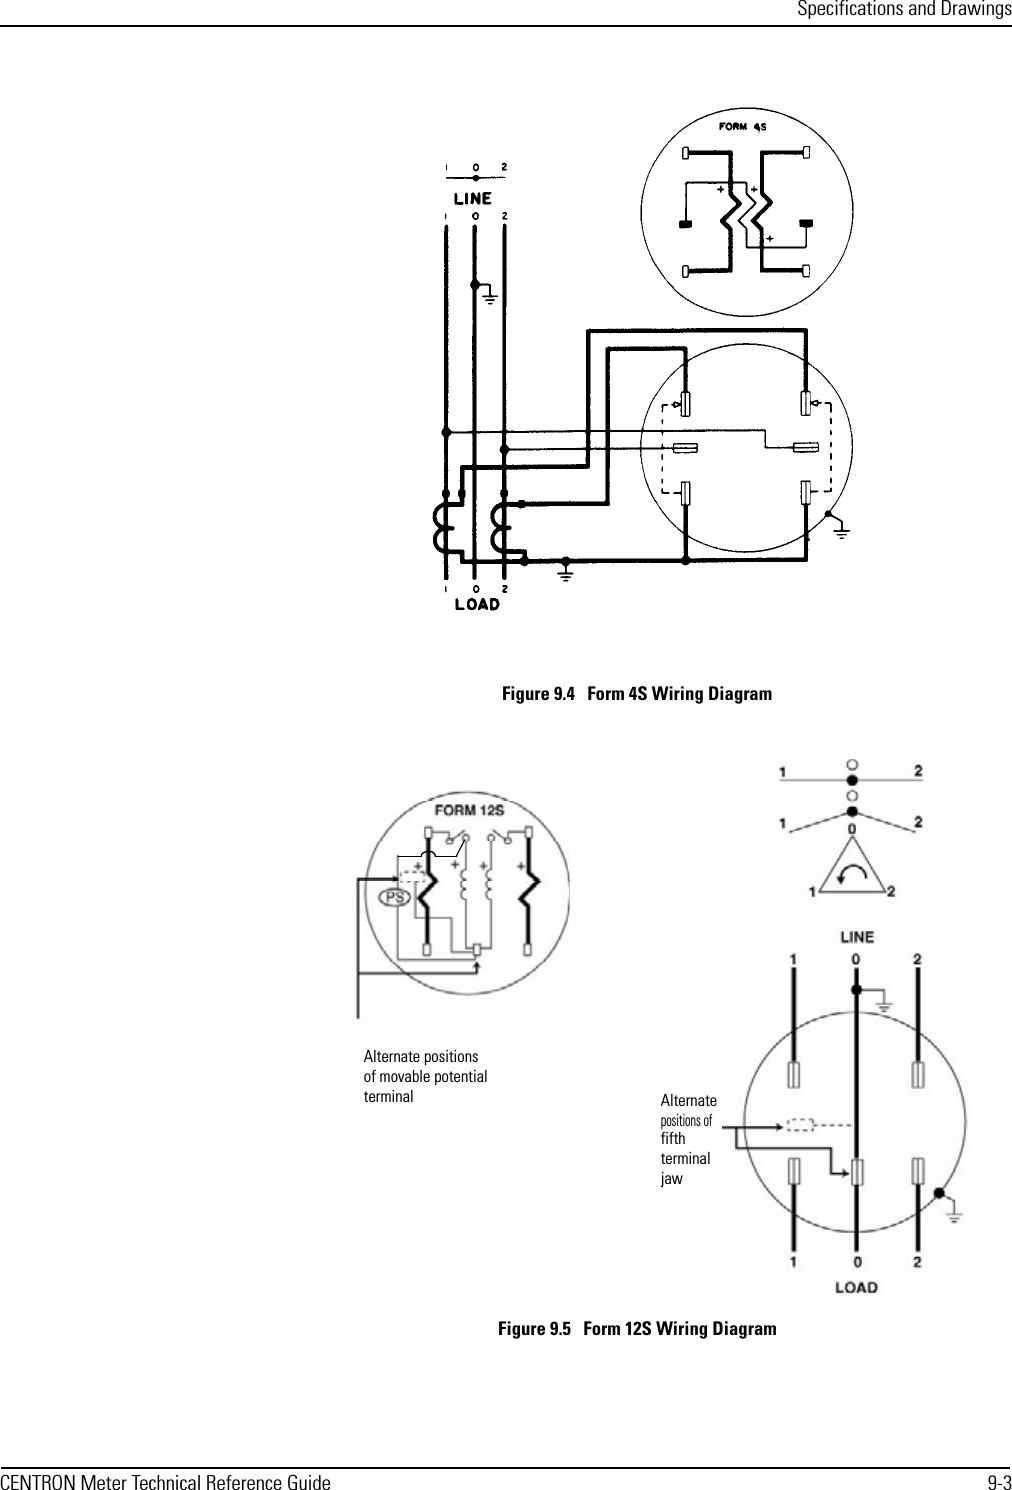 Specifications and DrawingsCENTRON Meter Technical Reference Guide 9-3Figure 9.4   Form 4S Wiring DiagramFigure 9.5   Form 12S Wiring DiagramAlternatepositions offifth jawterminalAlternate positionsof movable potentialterminal